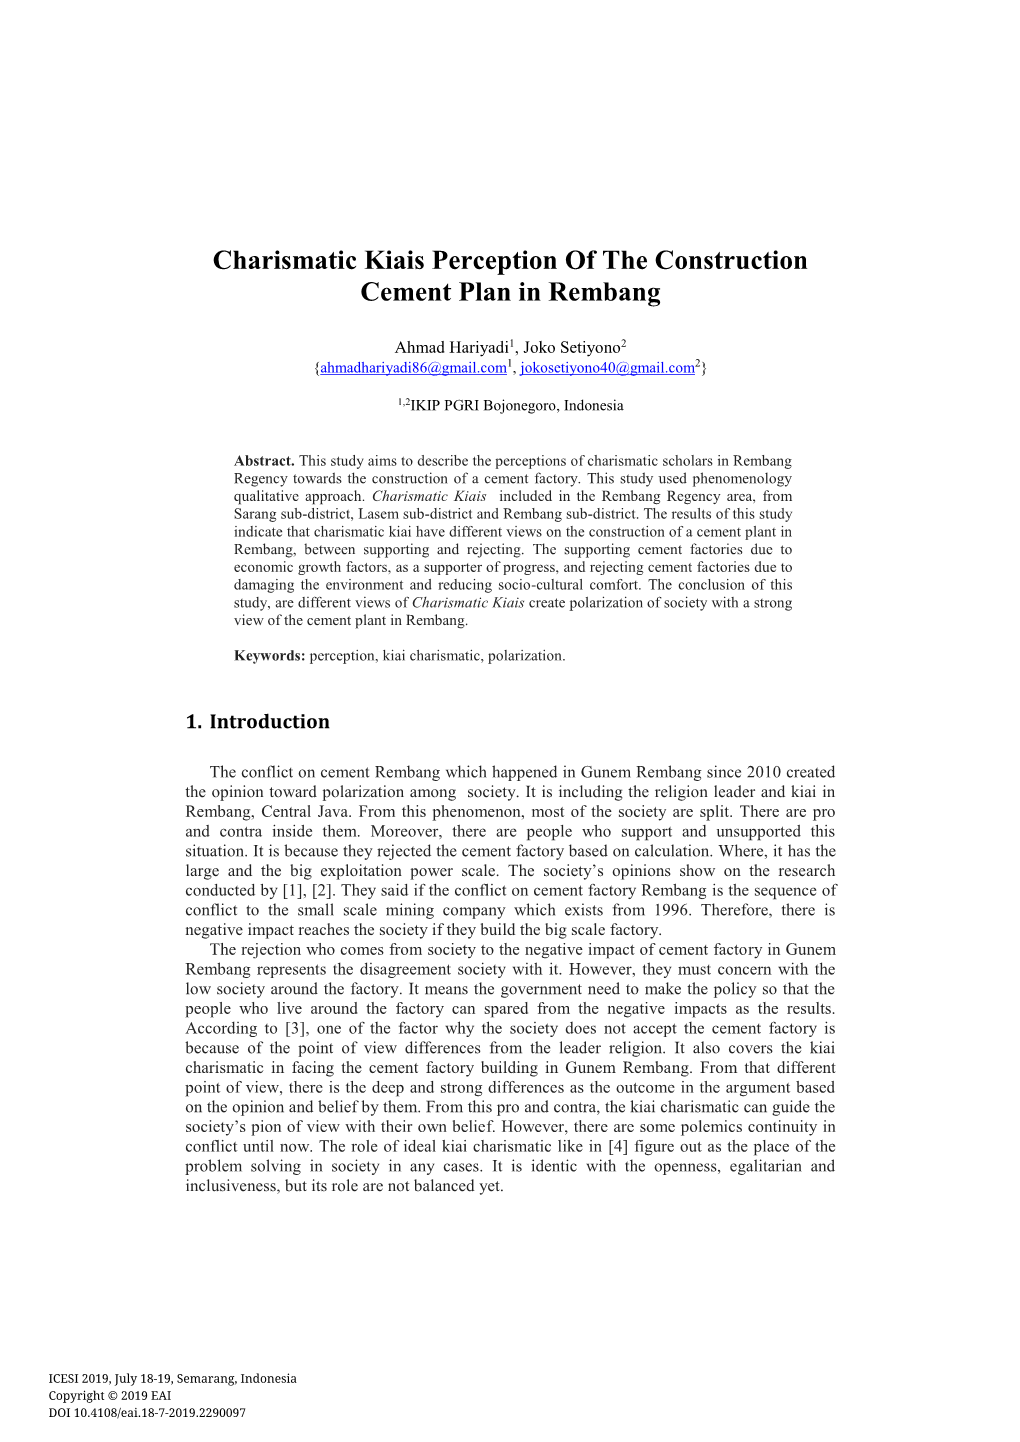 Charismatic Kiais Perception of the Construction Cement Plan in Rembang